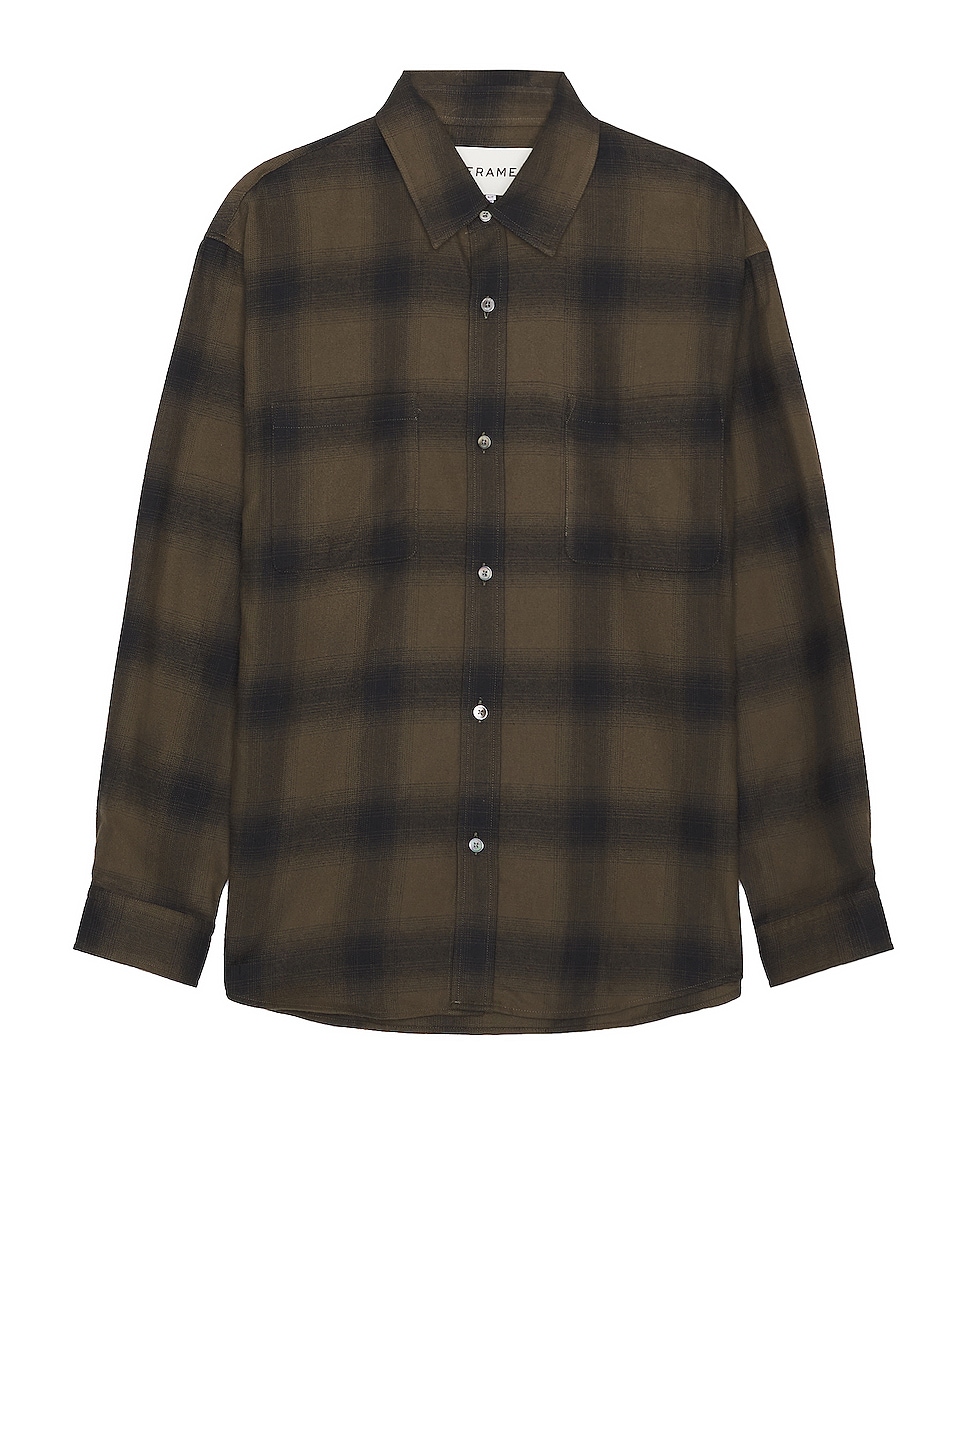 Image 1 of FRAME Flannel Shirt in Khaki Plaid